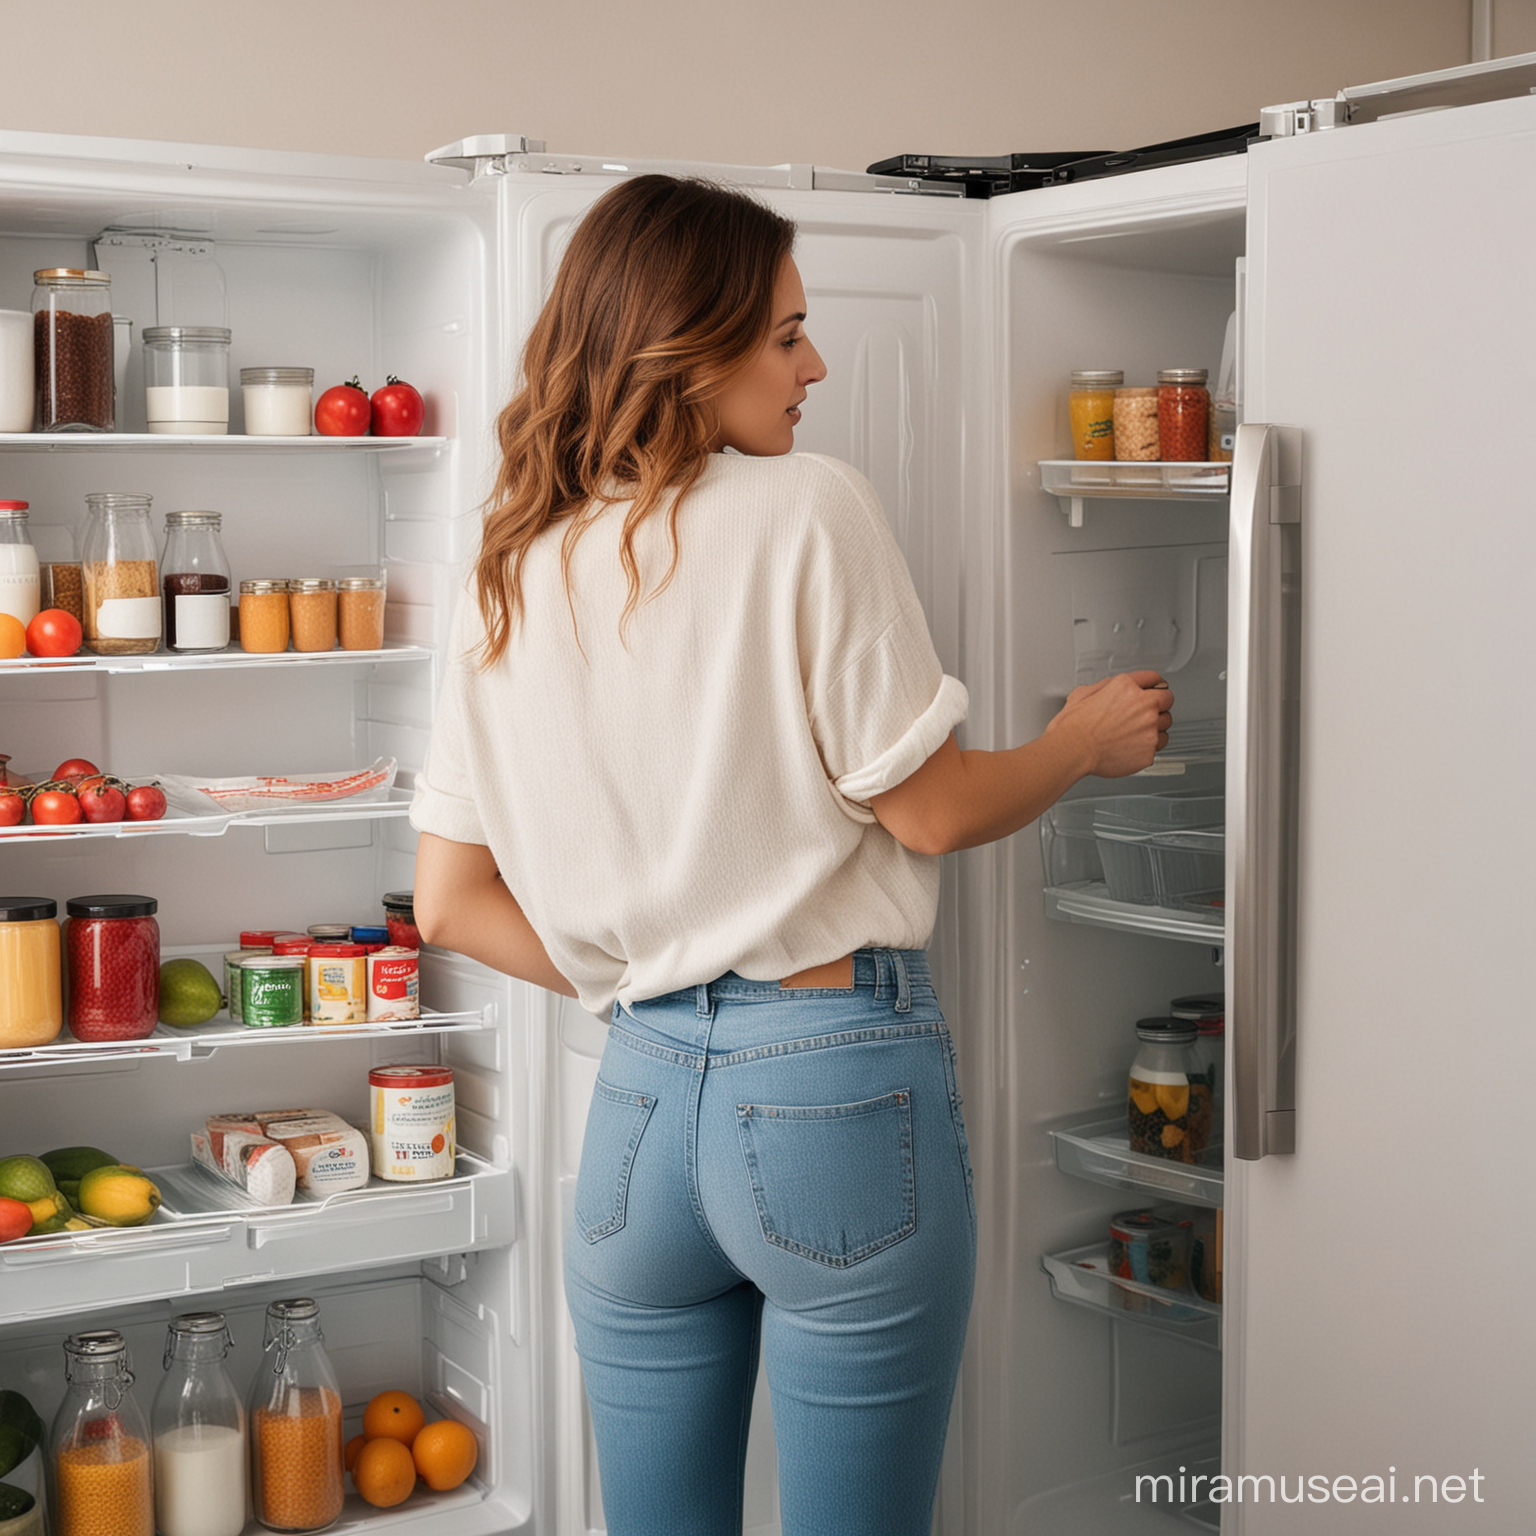 Young Woman Organizing Refrigerator Rear View